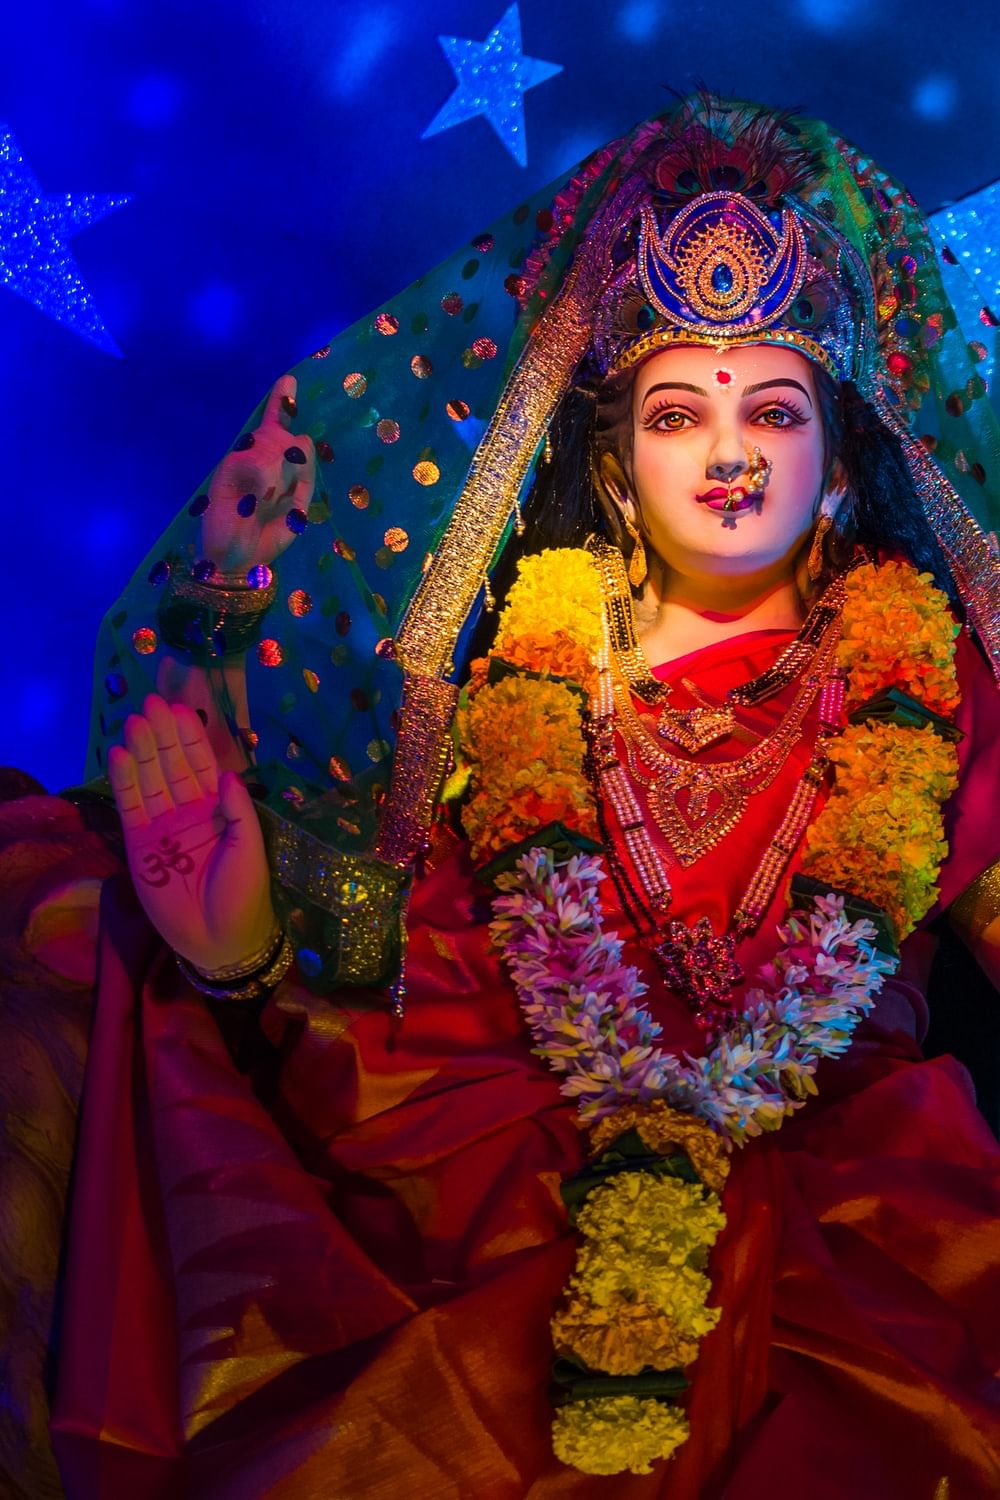 Thursday worship 2022: Worship Maa Durga in this form on Thursdays to get the best life partner